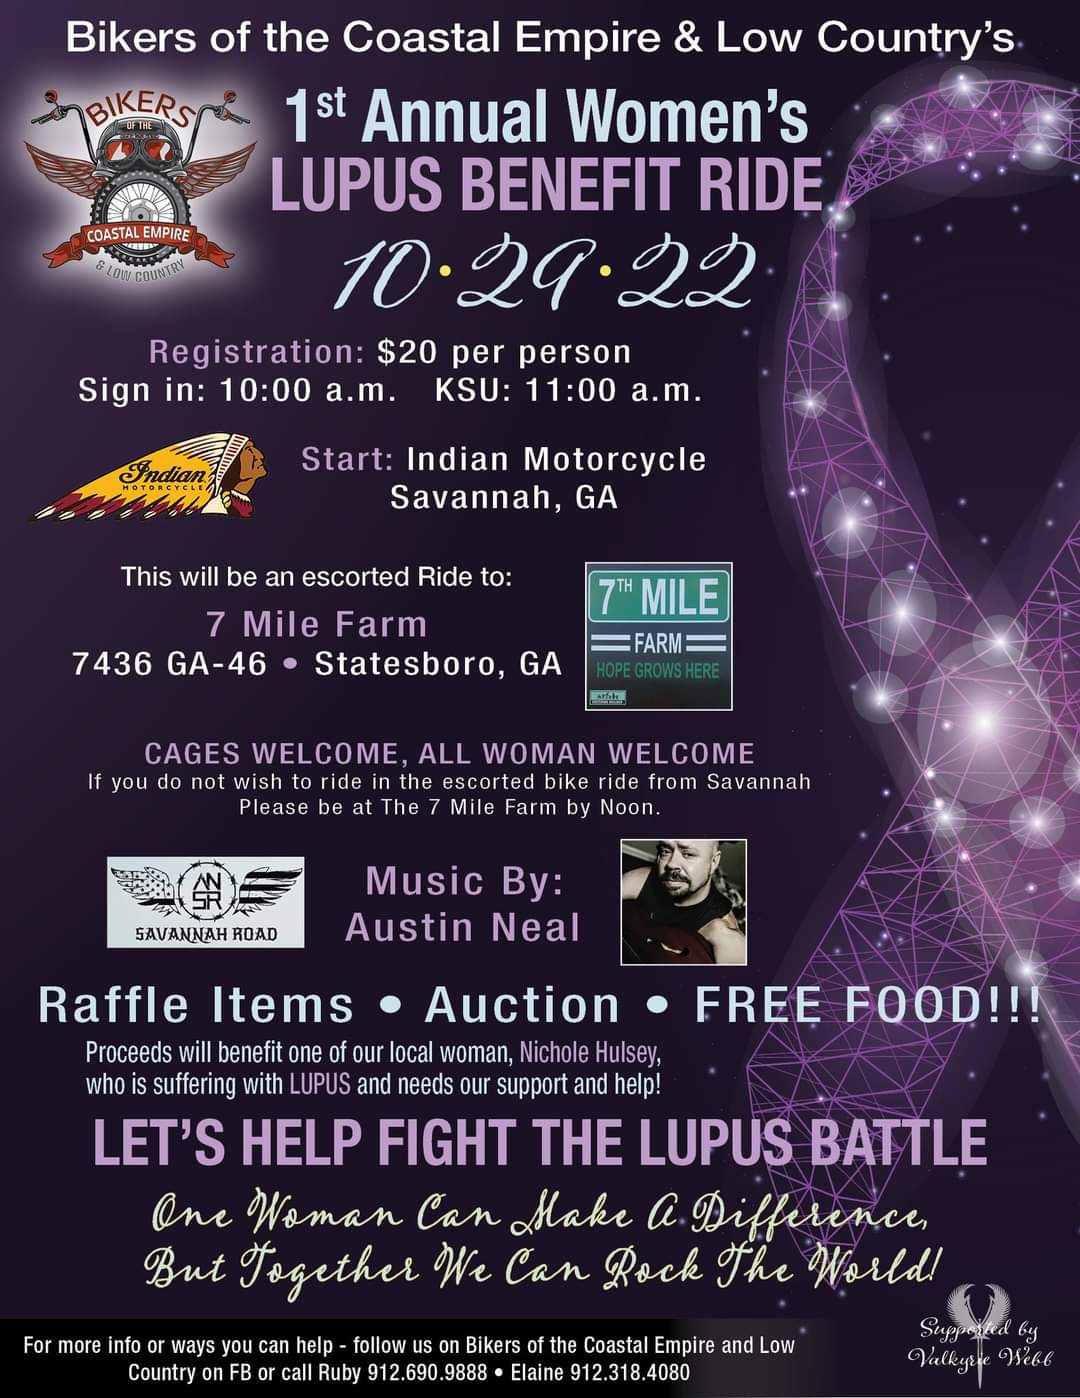 Bikers of the Coastal Empire & Low Country's 1st Women's Lupus Benefit Ride @ Indian of Savannah | Savannah | Georgia | United States